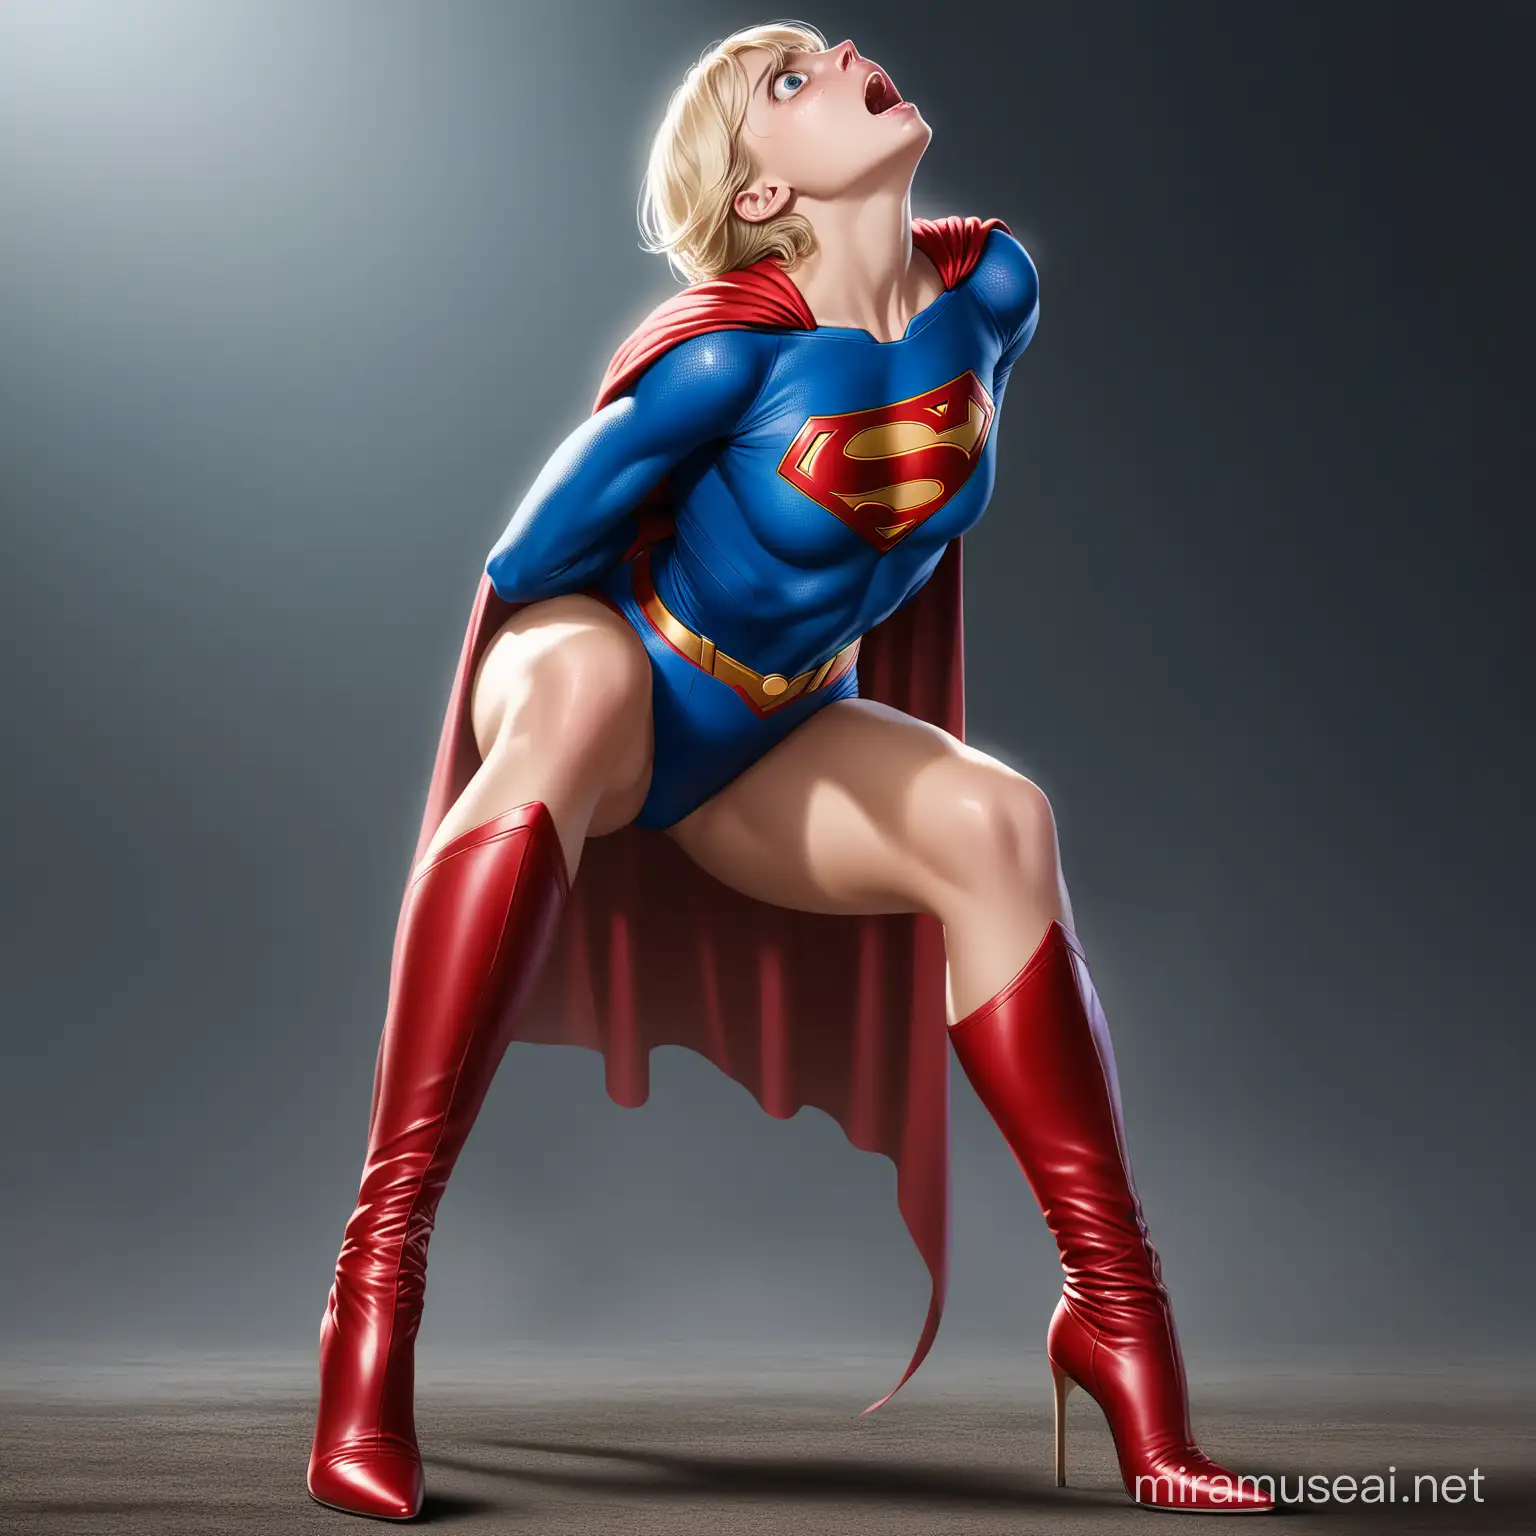 Supergirl dressed as Superman, defeated, perfect face, androgynous, very short blond hair, lean, wide eyed, gasping, choking, hands on neck, long legs and tall leather knee high boots stiletto, 4k resolution, realistic,